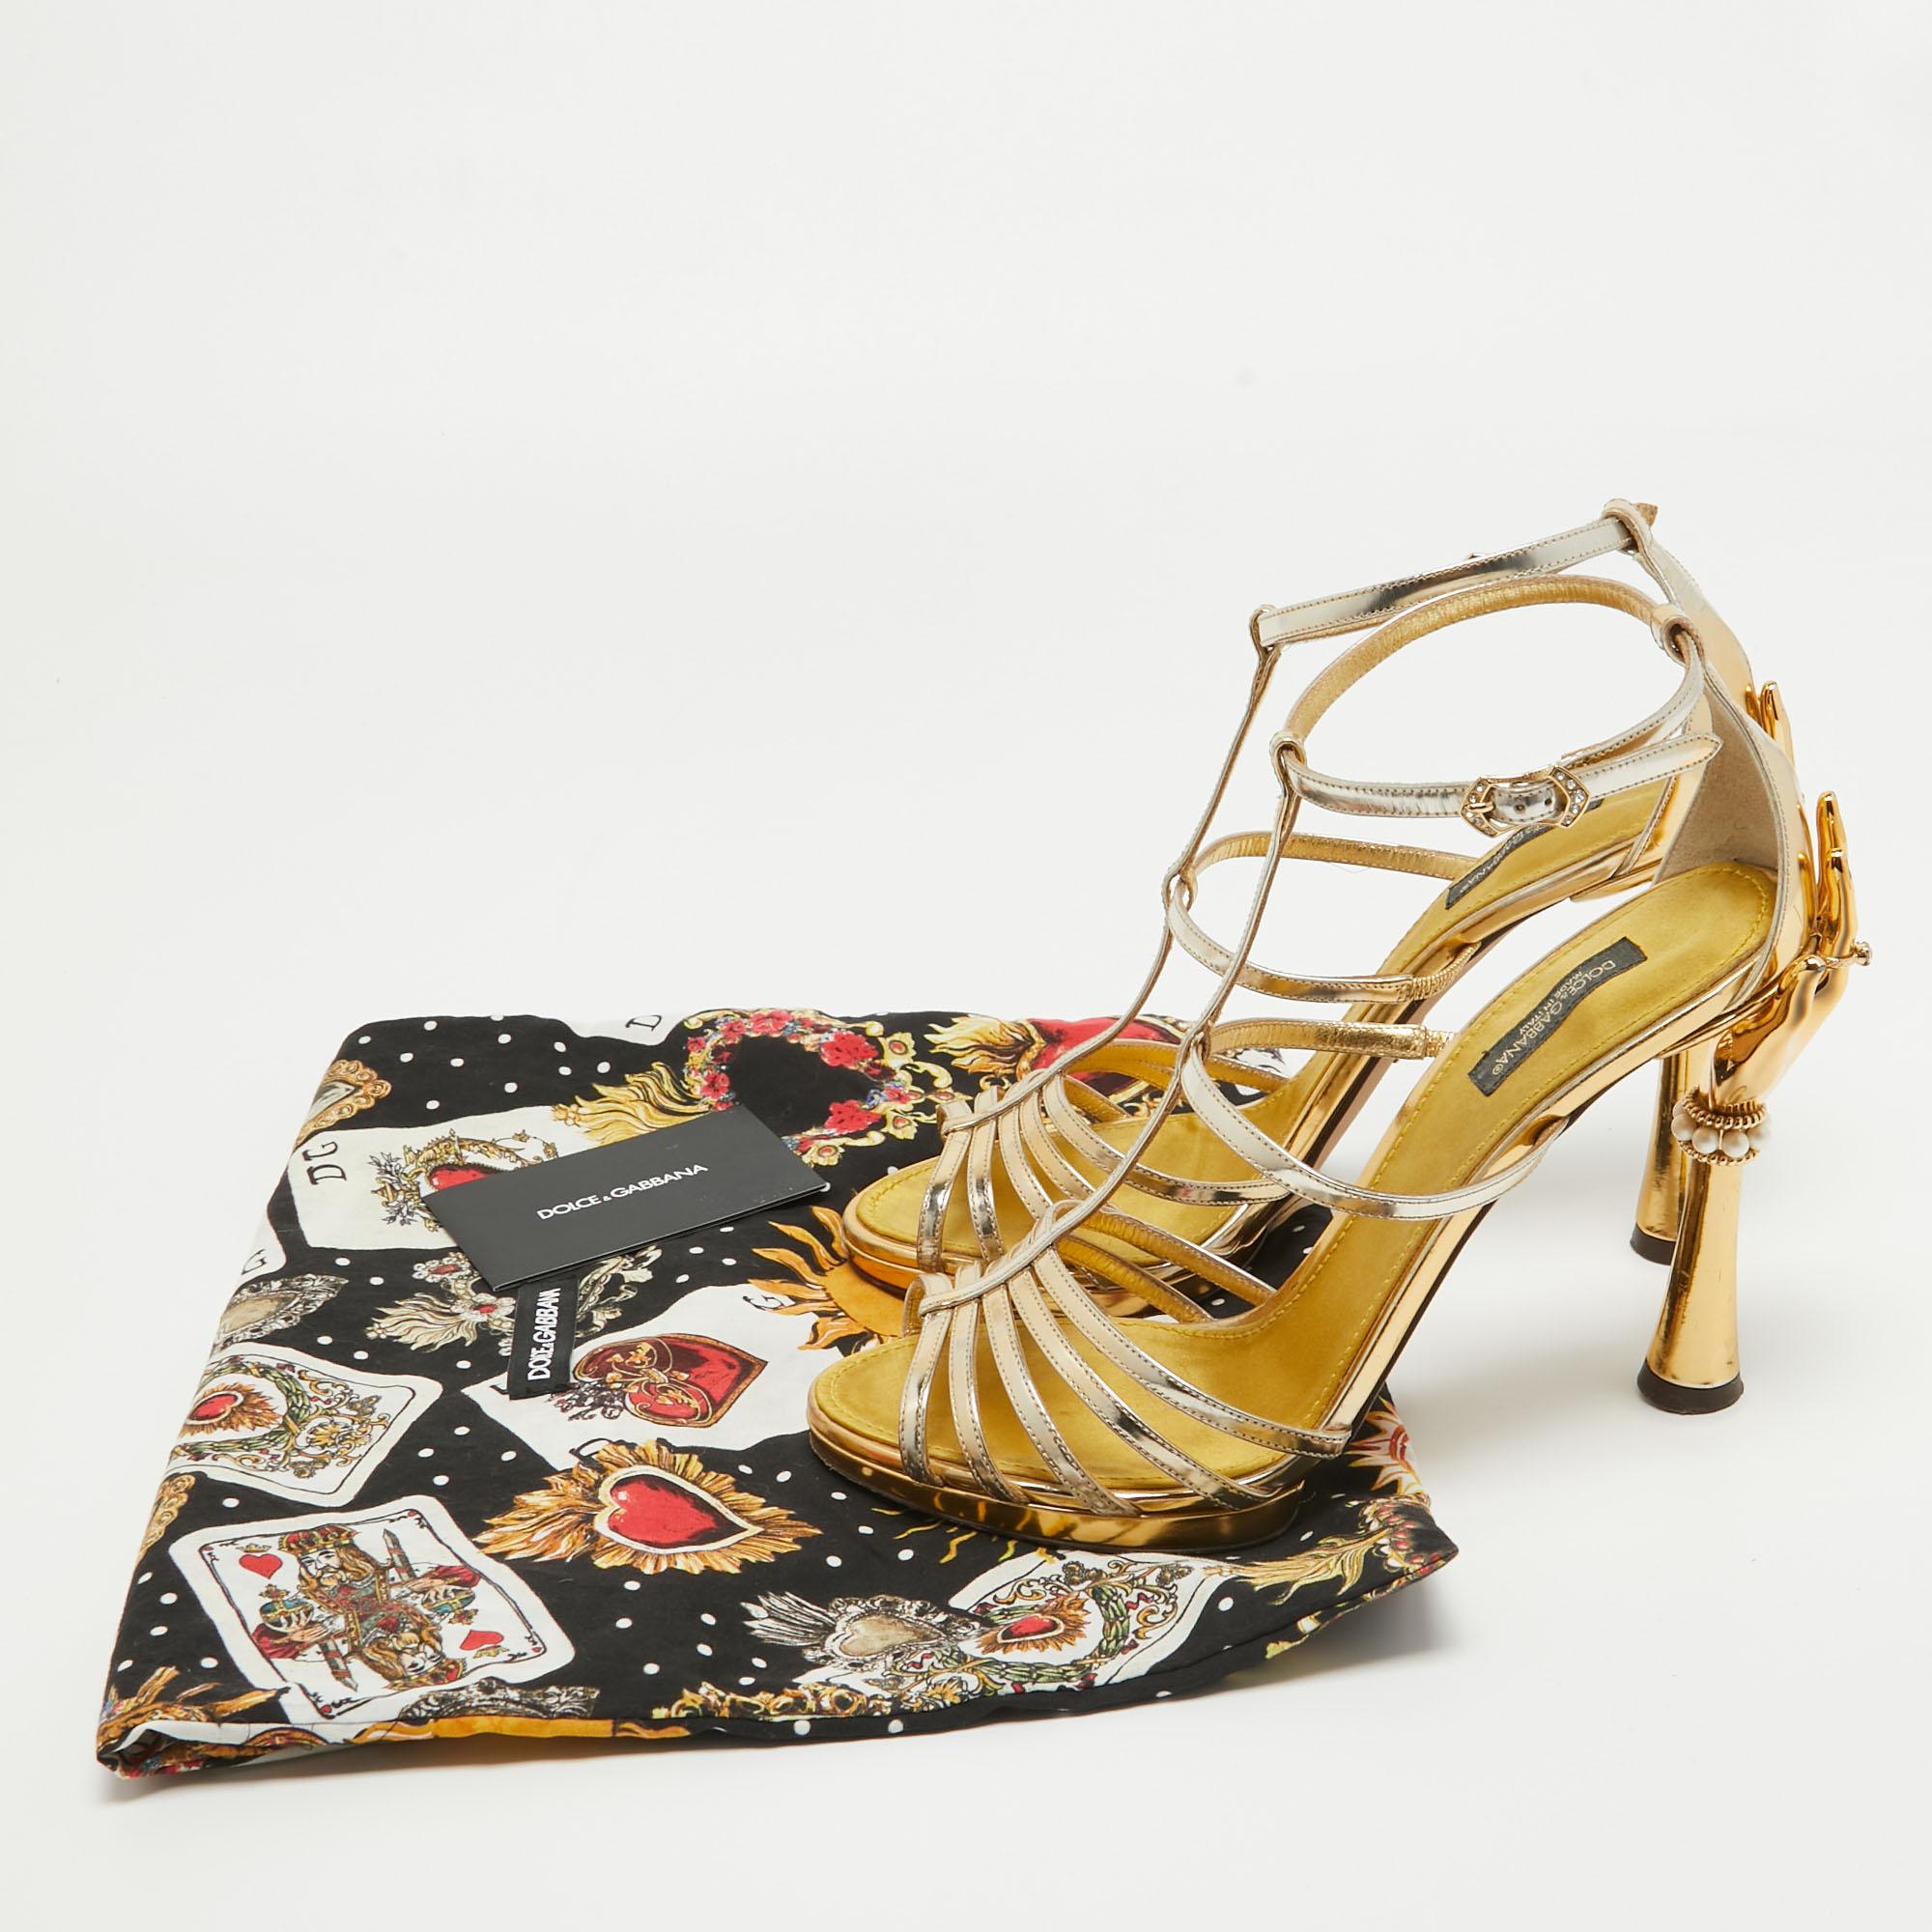 Dolce & Gabbana Gold Leather With Sculpted Ankle Strap Sandals Size 39.5 For Sale 5